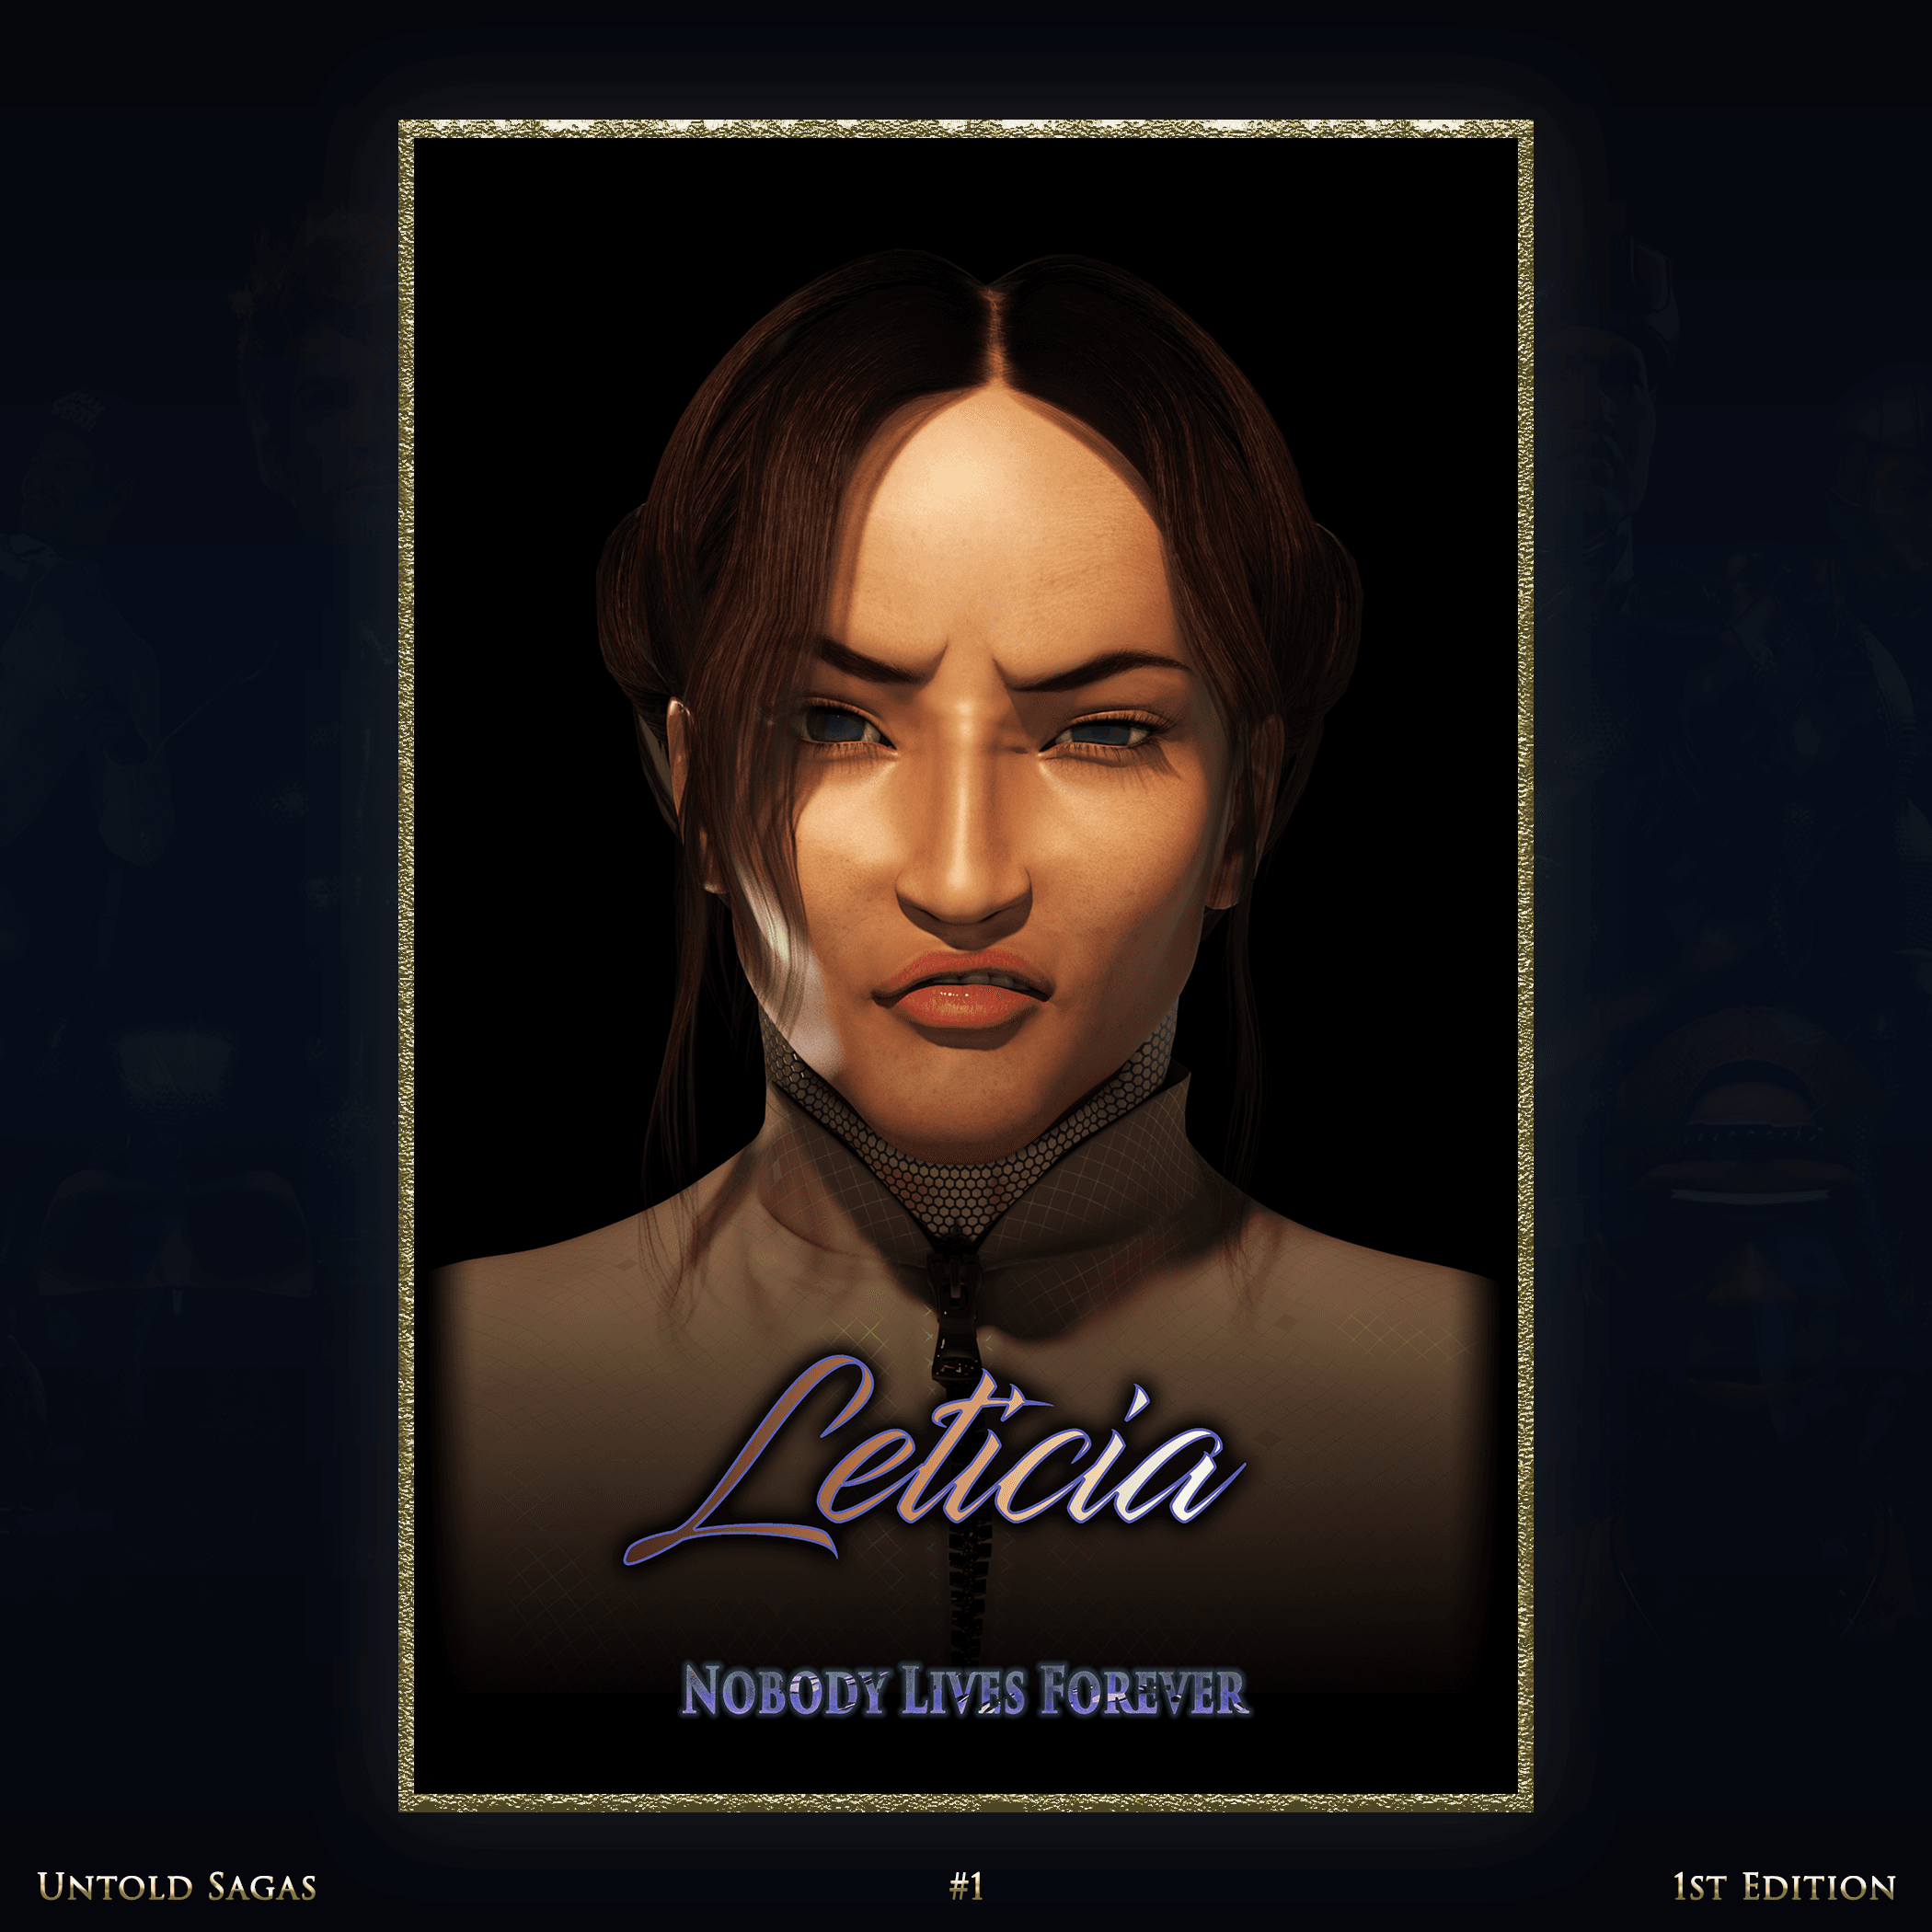 Character Card	1st Edition	Leticia	#1